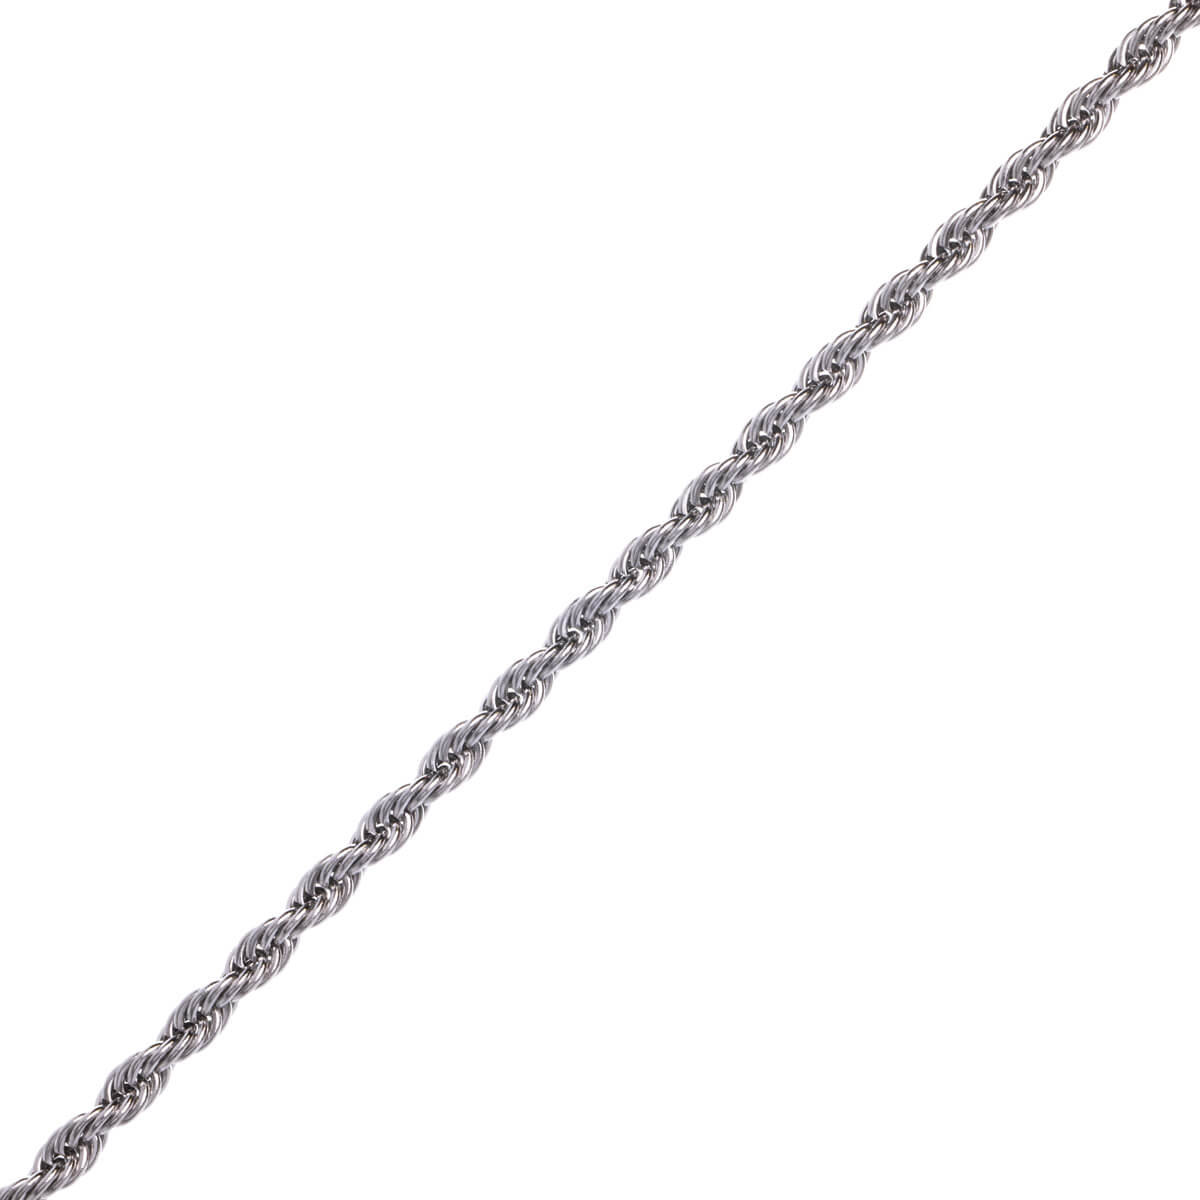 Steel cord chain rope chain necklace 3mm 48cm +5cm